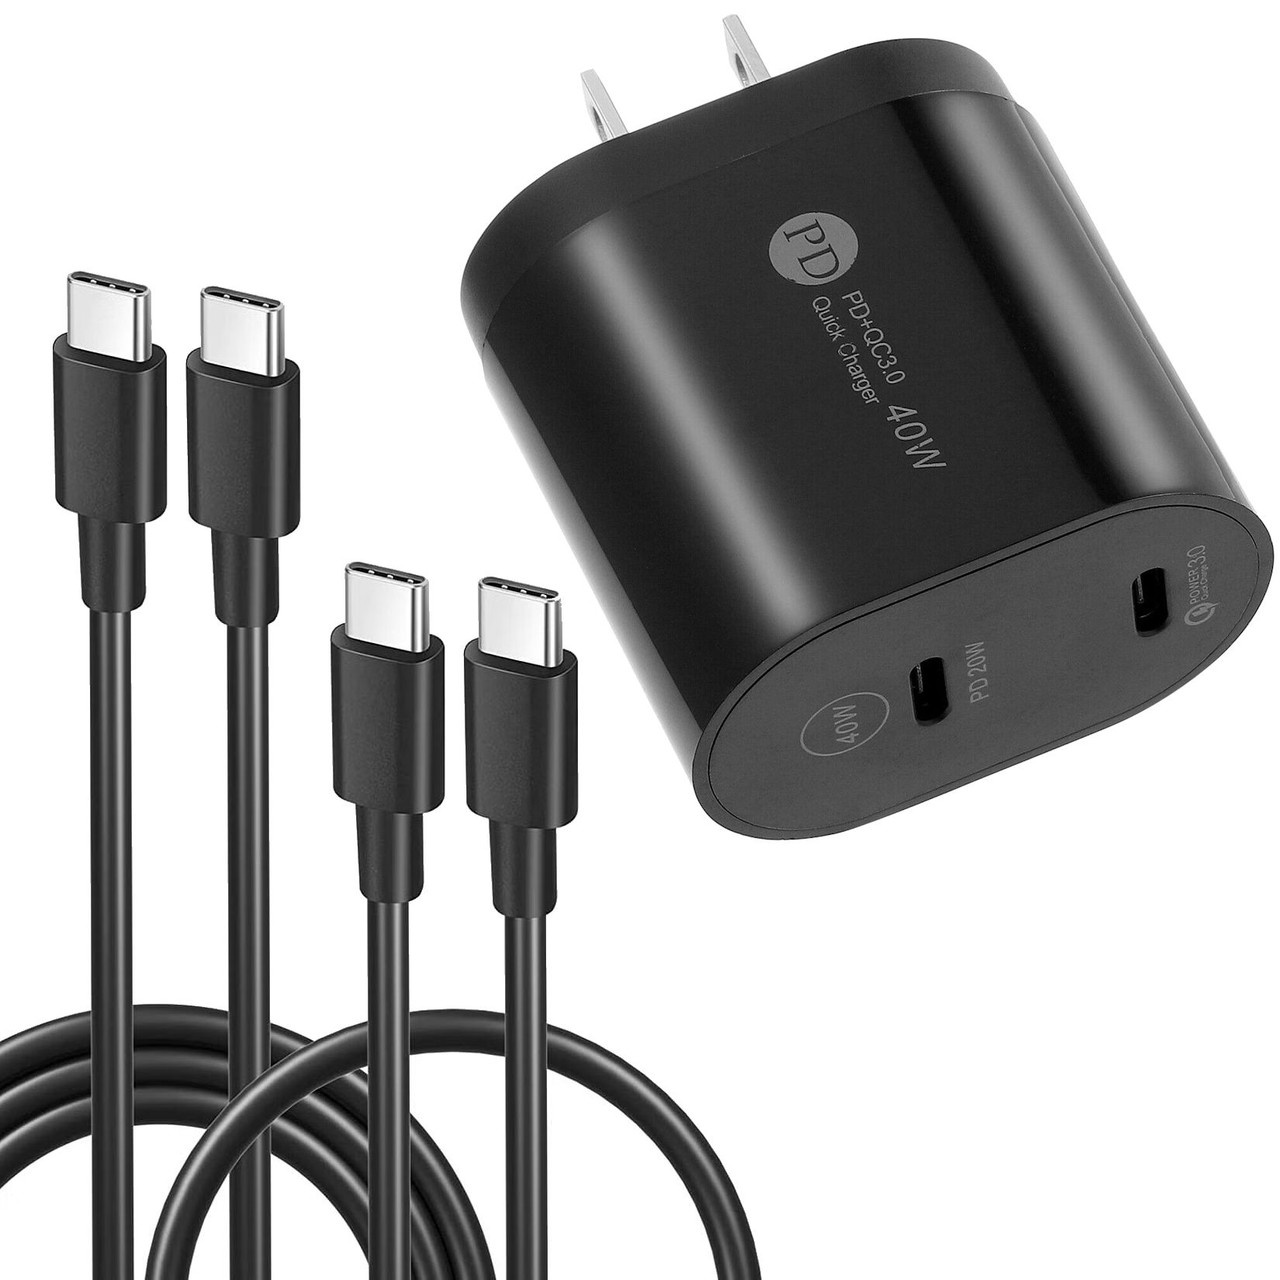 40W Dual USB-C PD 3.0 Power Delivery Wall Charger + 2-Pack USB-C Cable -  Black - HD Accessory